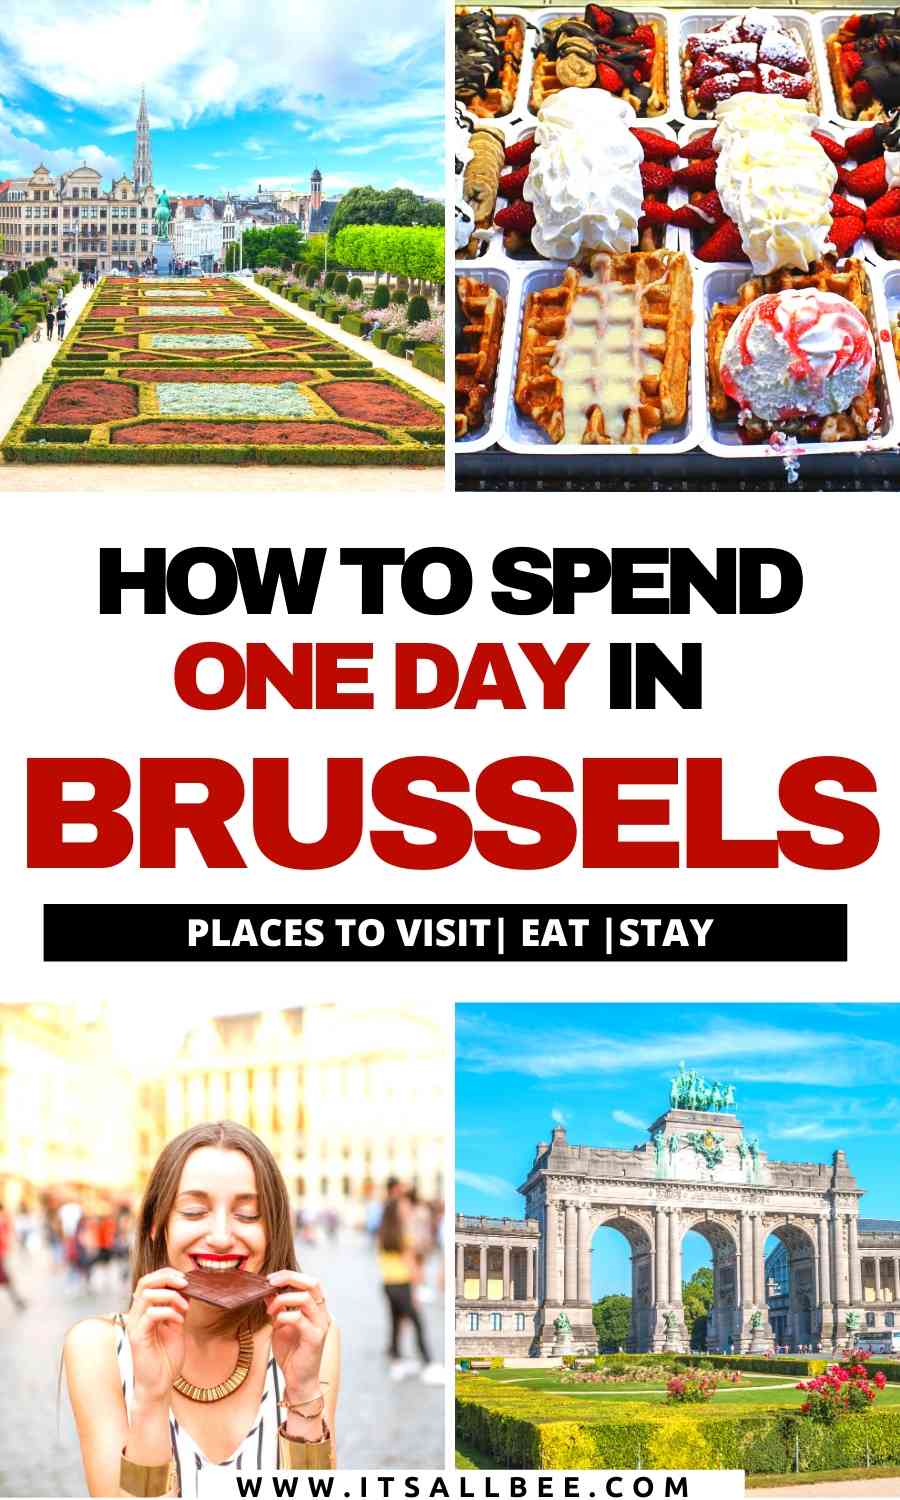 Brussels one day guide